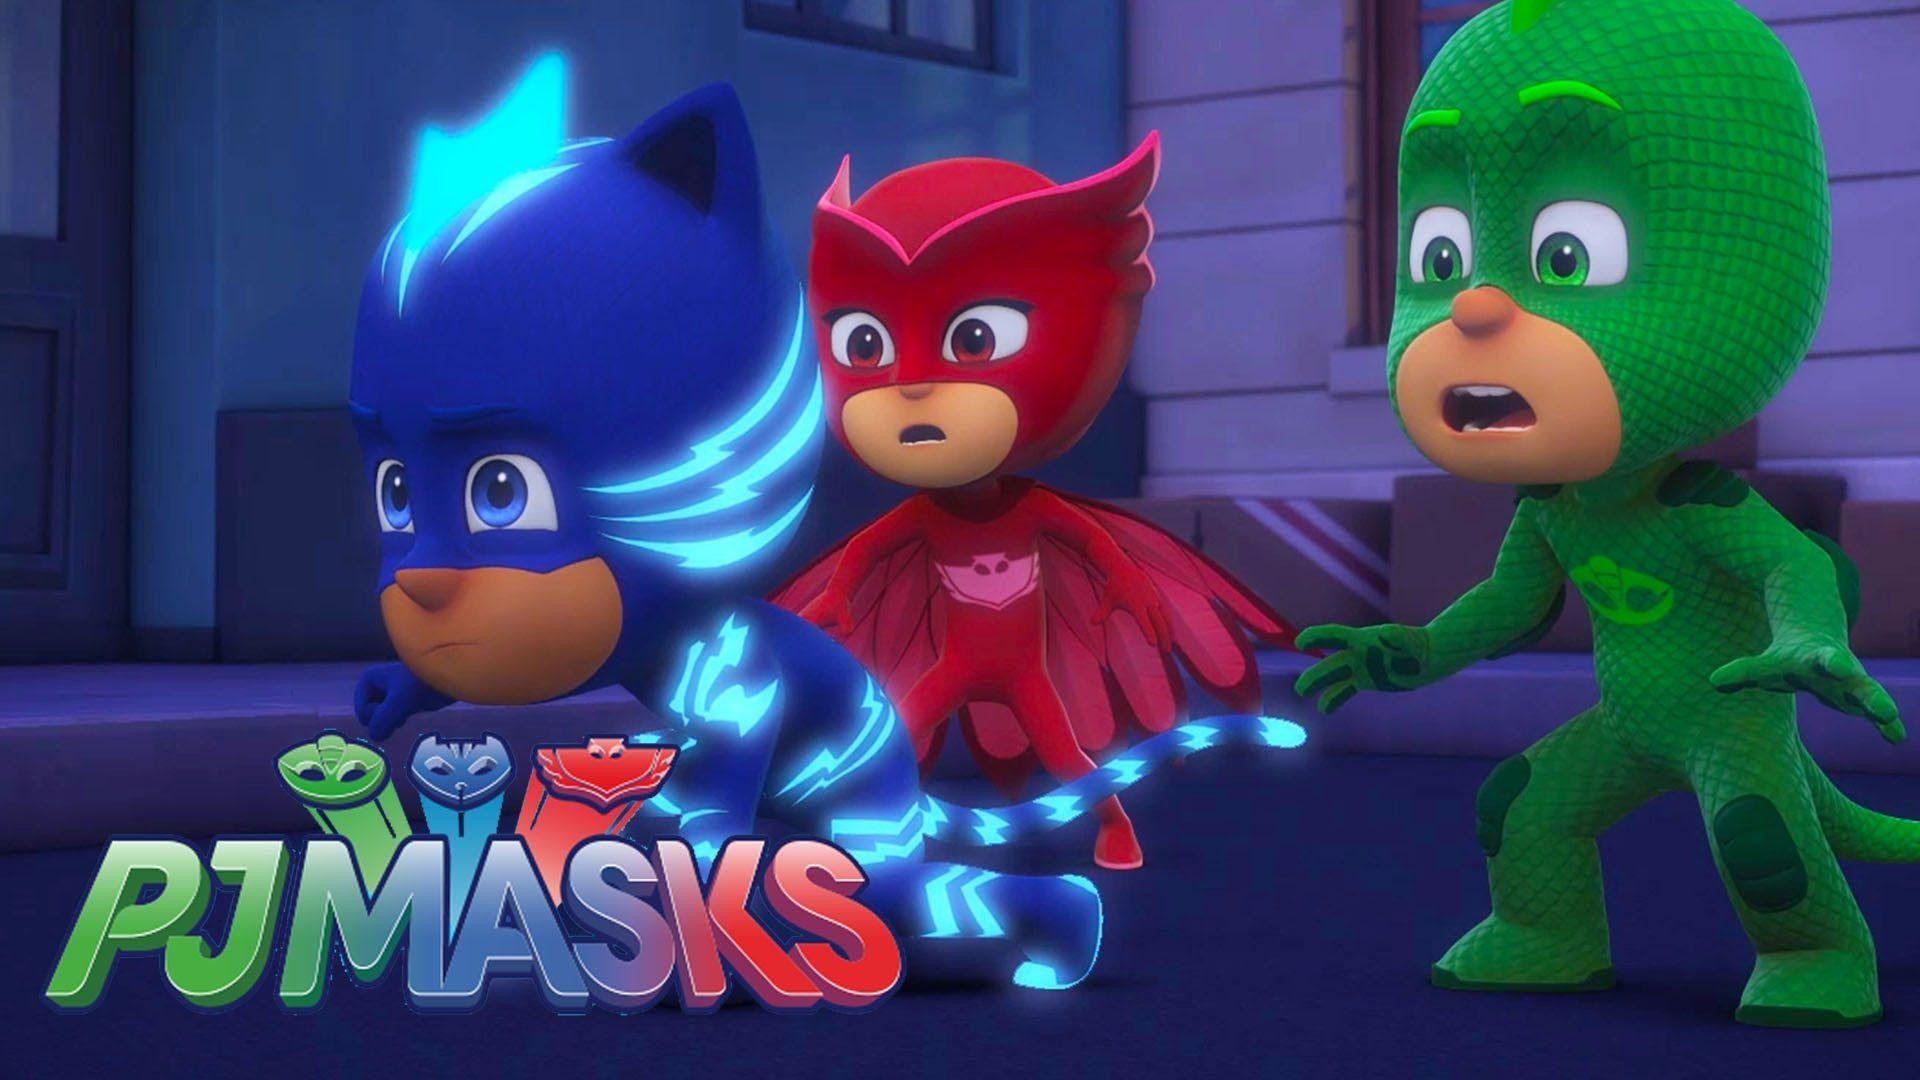 1920x1080 PJ Masks - The One With Robo-Cat - YouTube